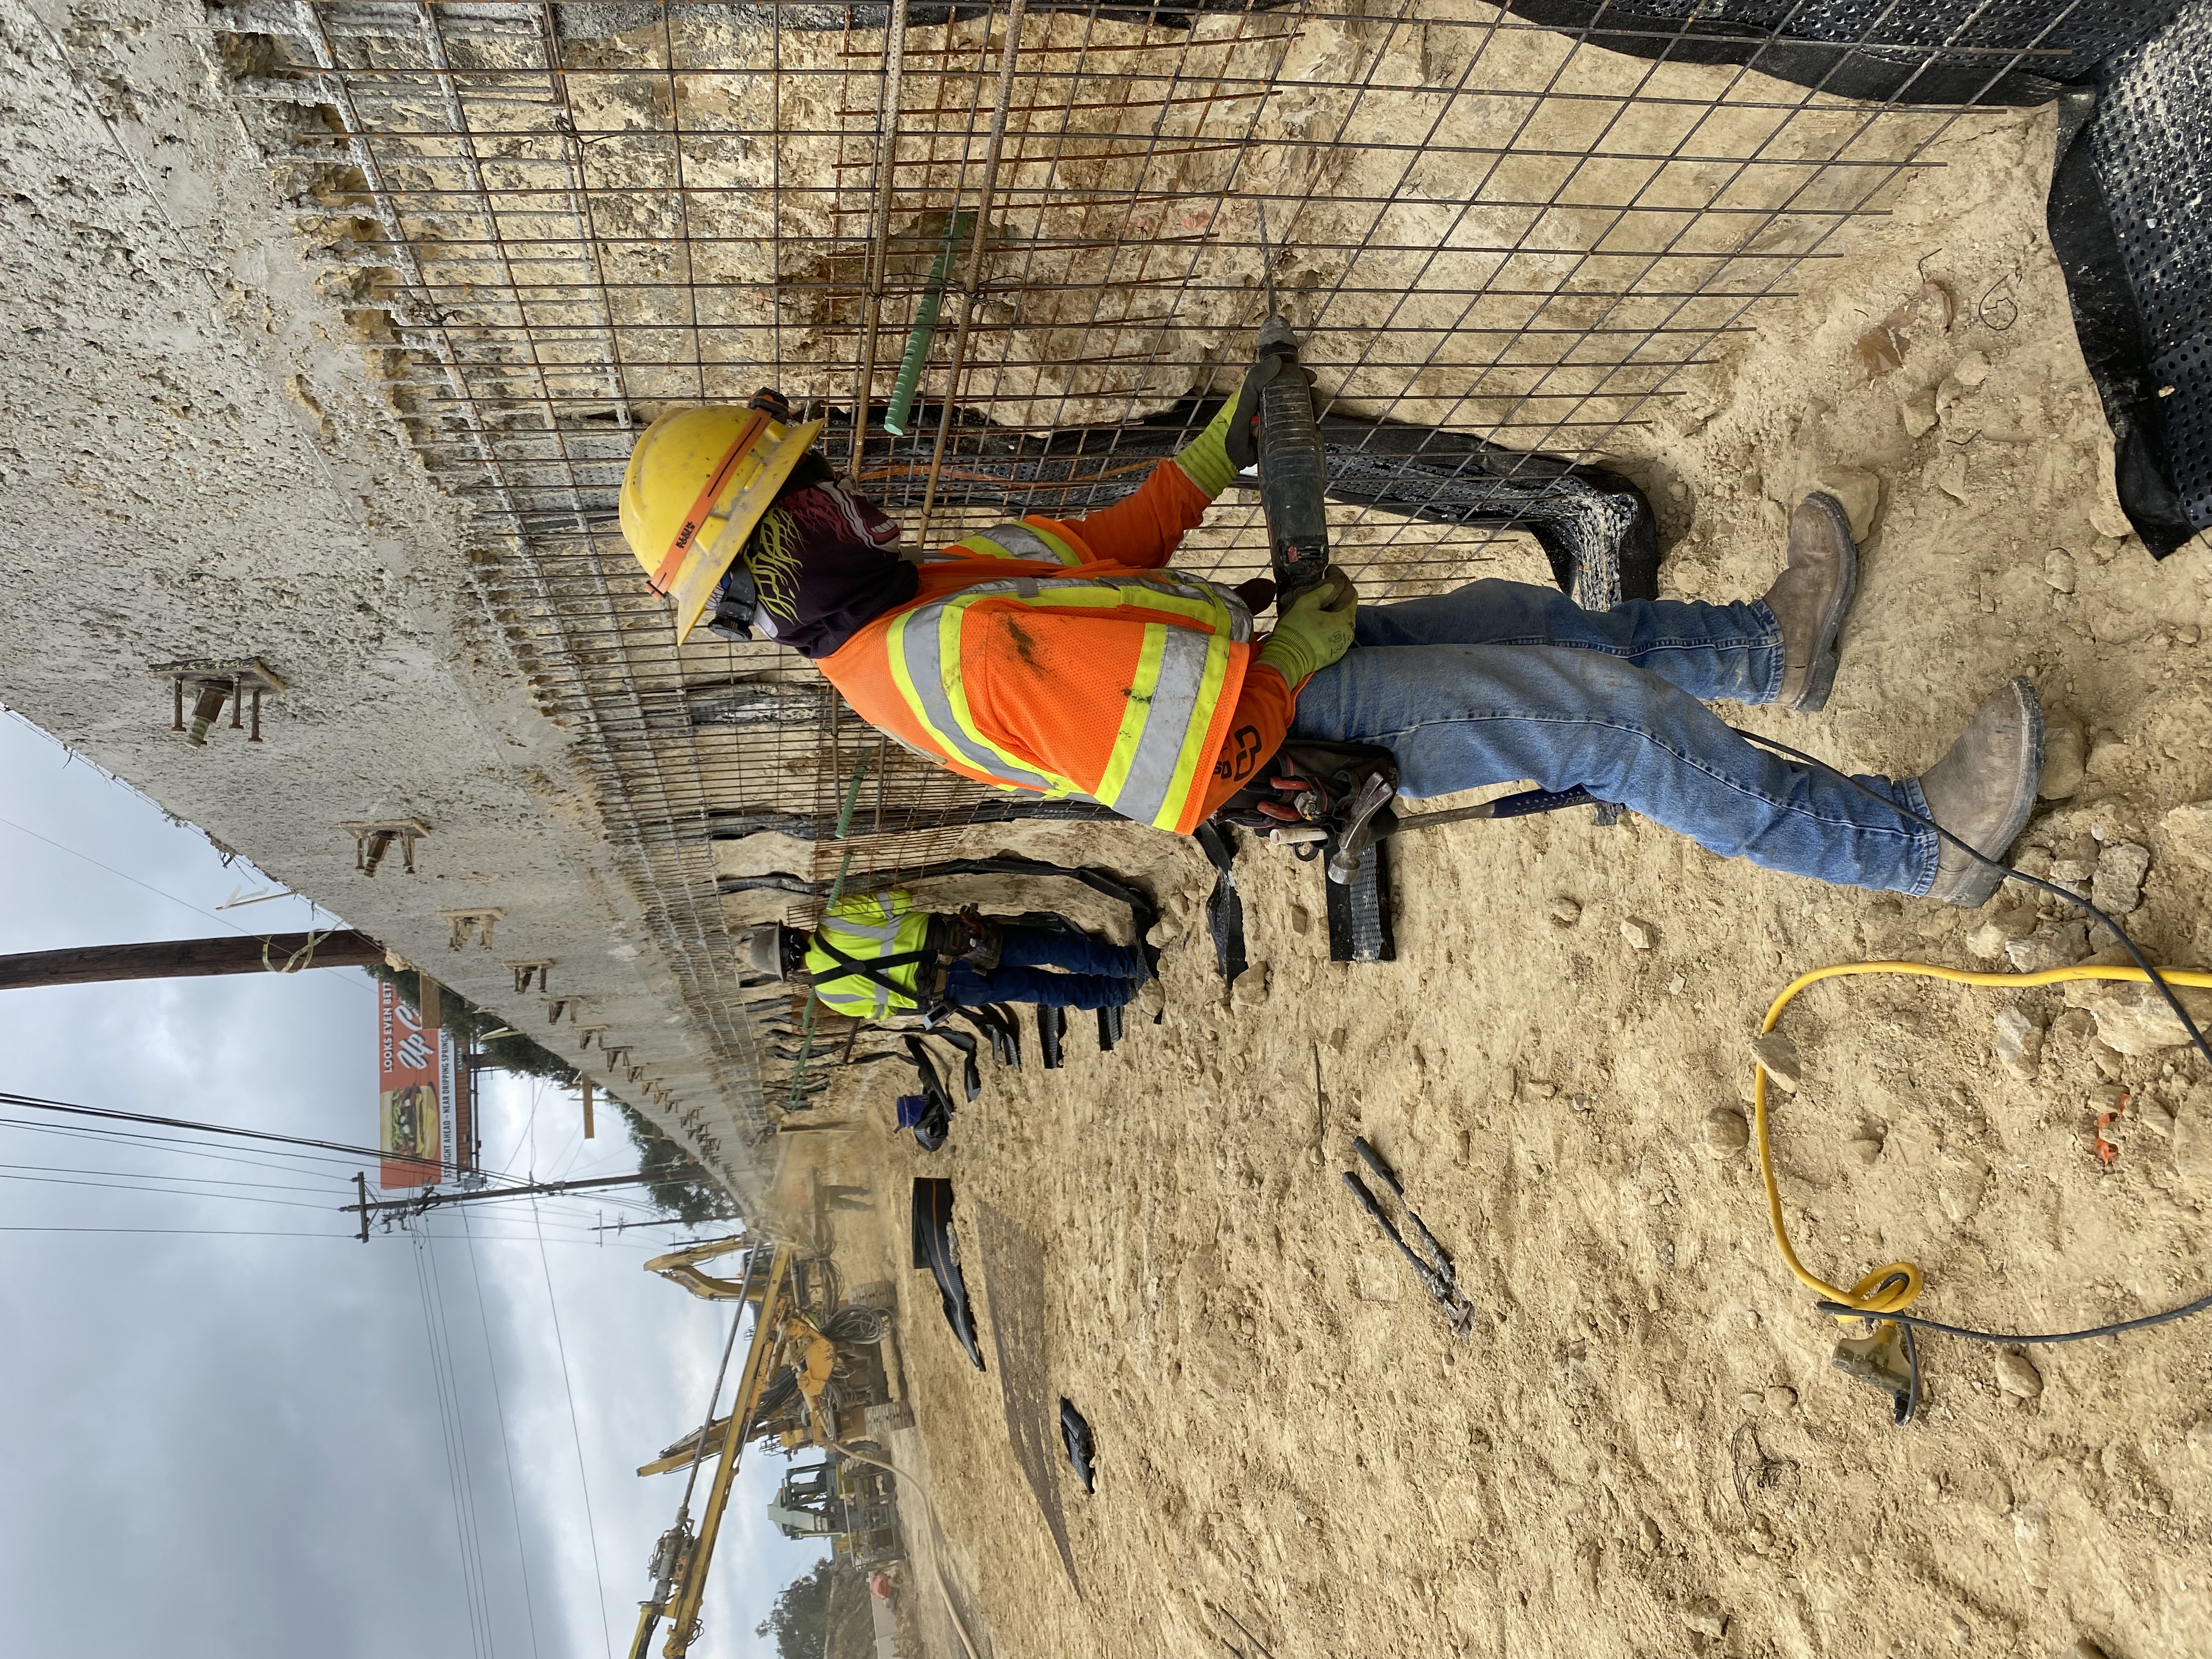 The team installs wire mesh reinforcements. Behind them a large soil nail drilling machine works to build a new retaining wall near US 290 and Circle Drive. December 2021